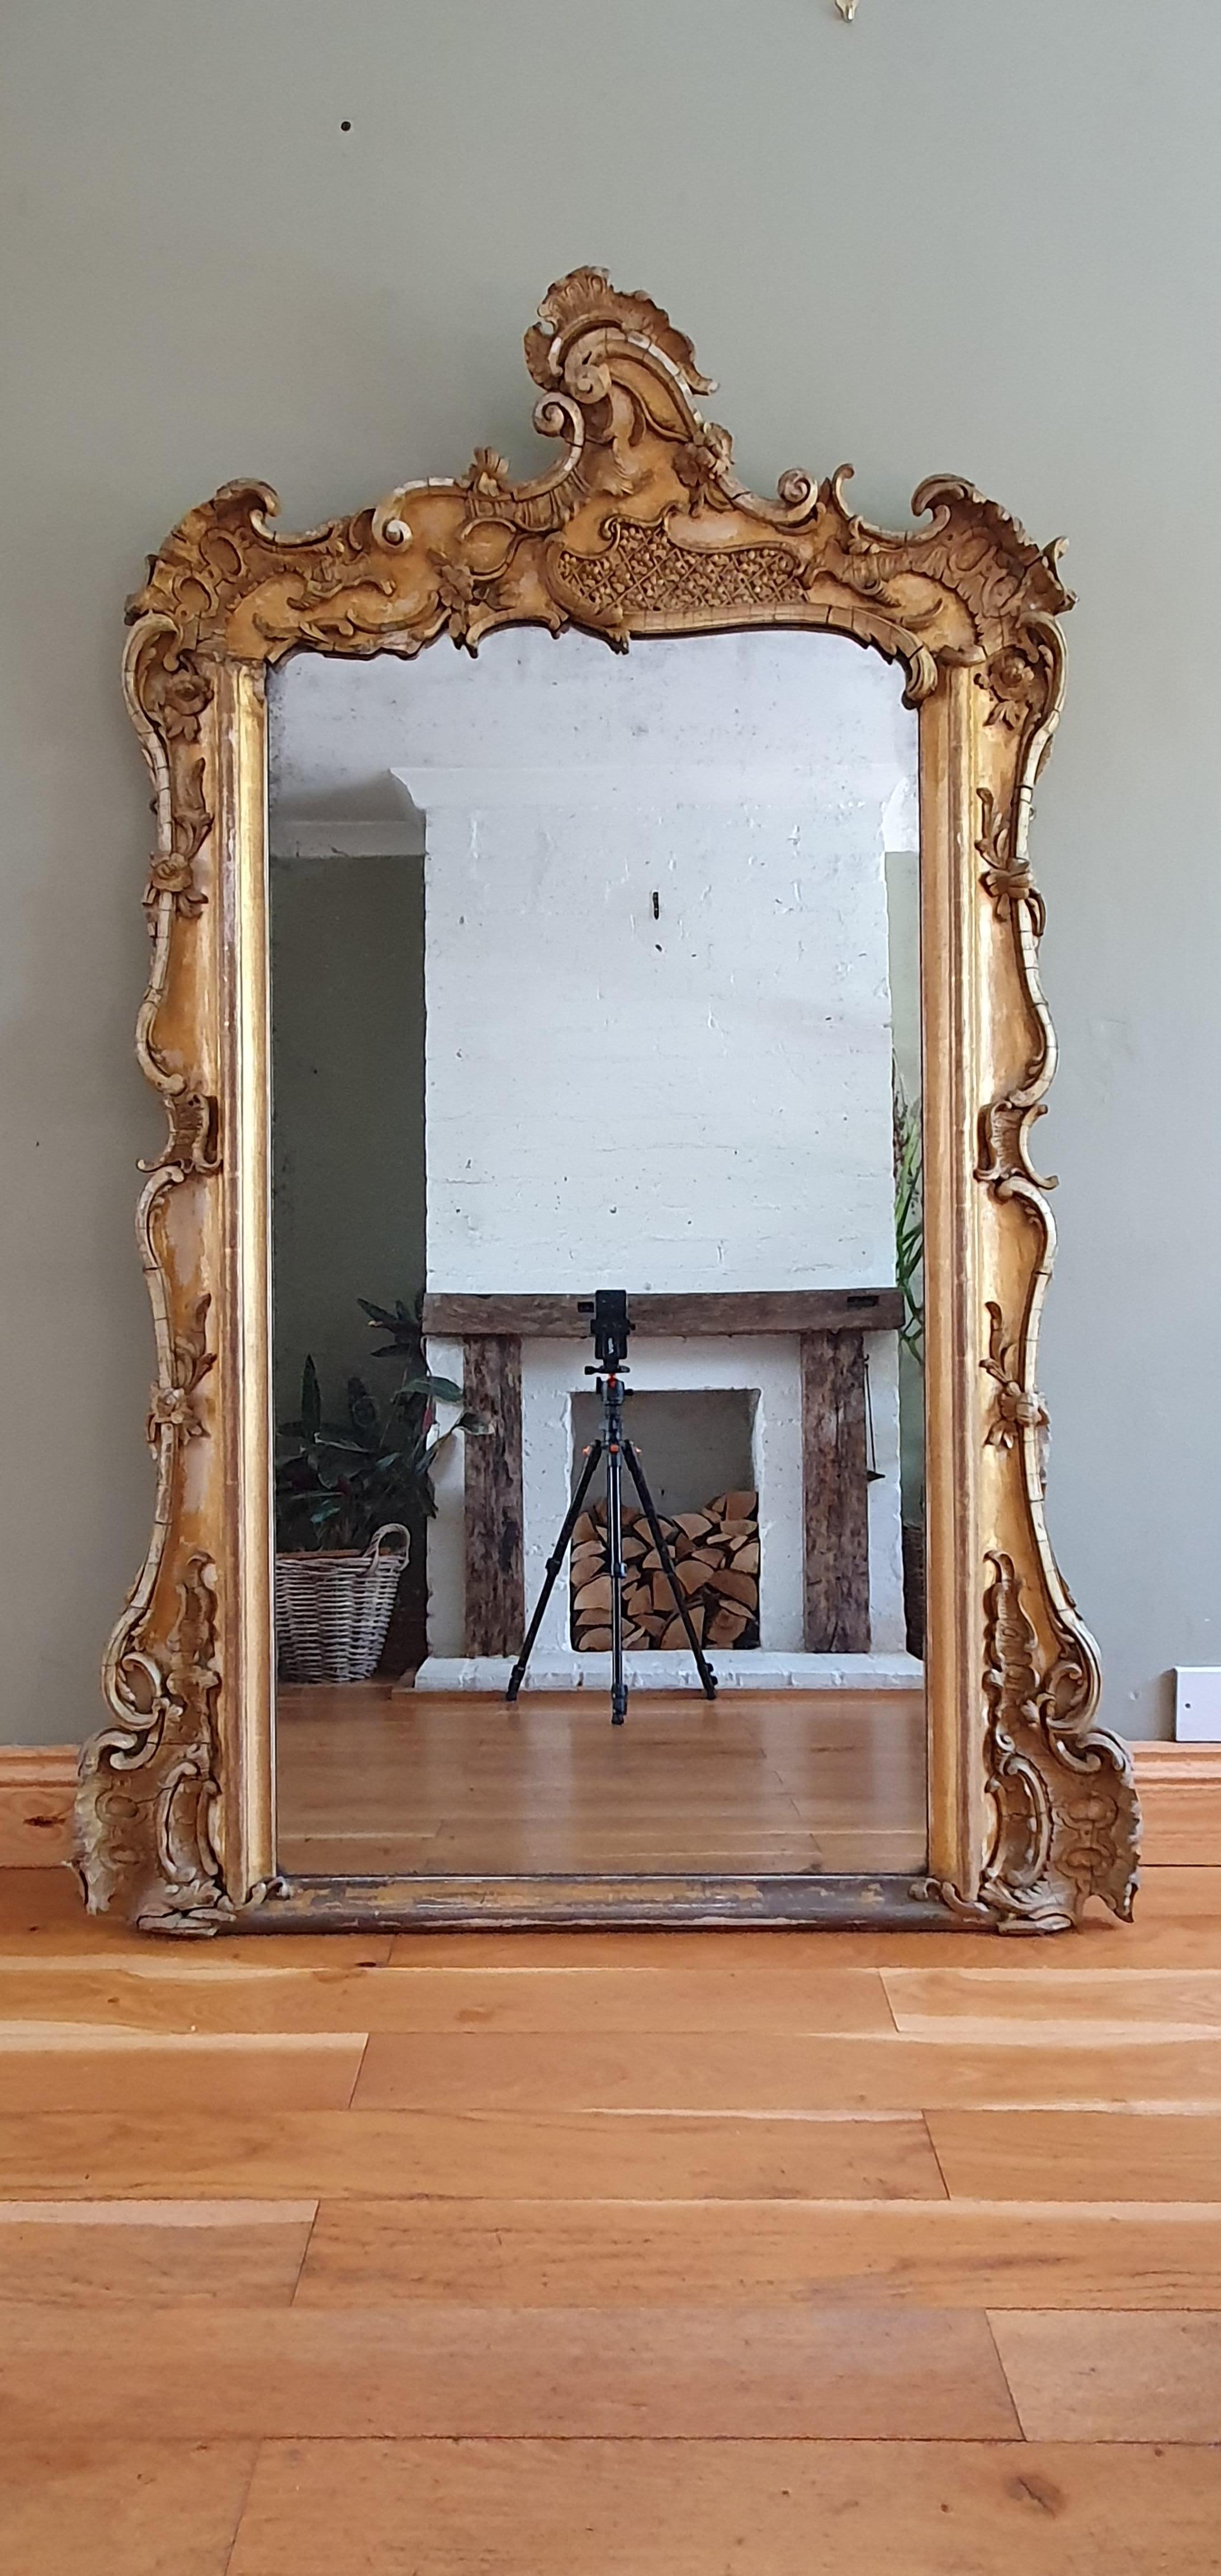 English overmantel/console table mirror, circa 1860. All in original condition (some ornaments missing) with original mercury glass.  Lovely rococo composition ornaments, very decorative and quite rare design. 